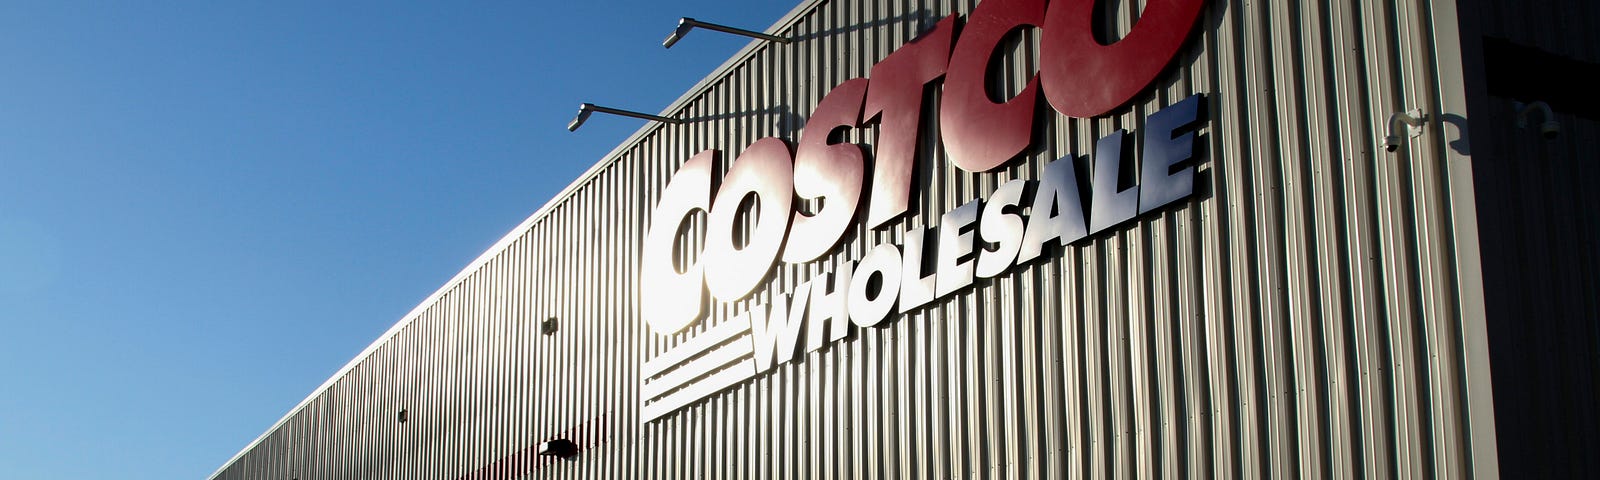 A massive white Costco warehouse looms across a bright blue sky, the name Costco Wholesale spelled out in large red and blue capital letters.